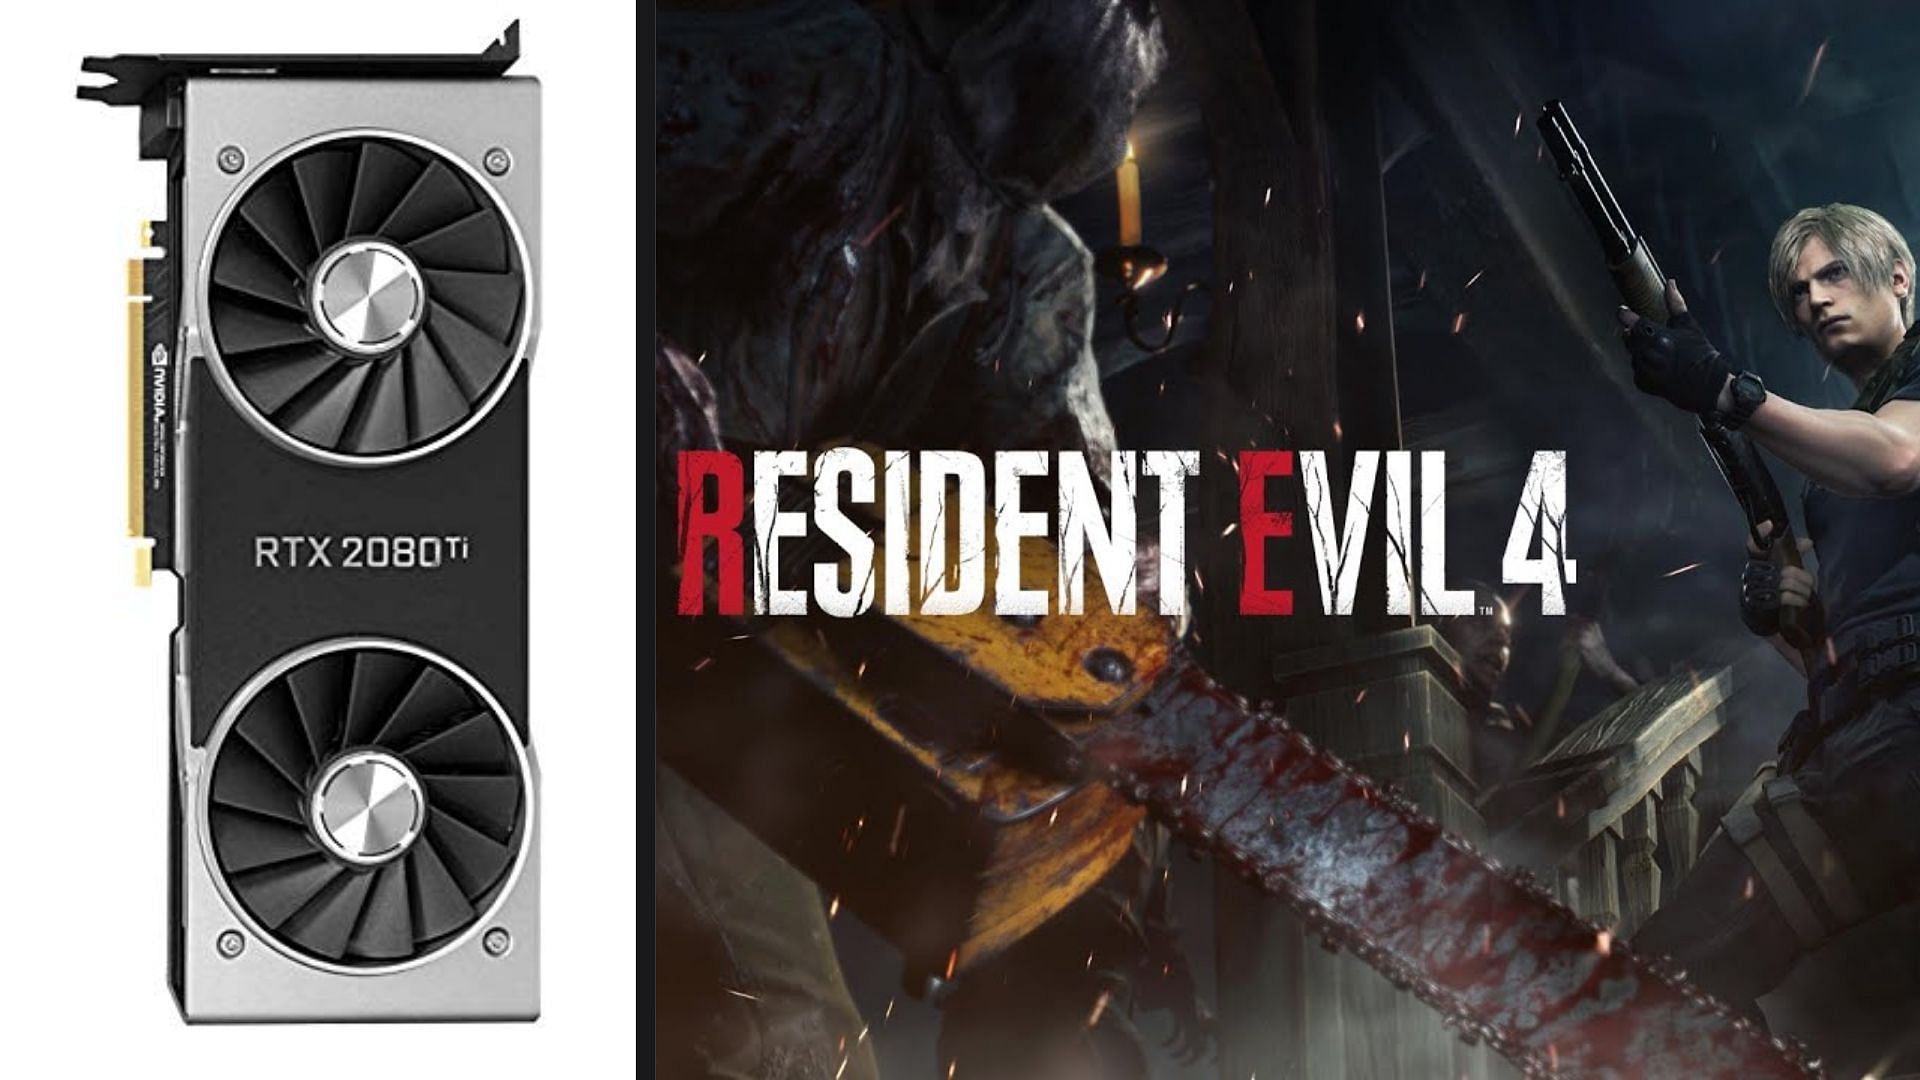 The RTX 2080 Ti FE and Resident Evil 4 remake cover